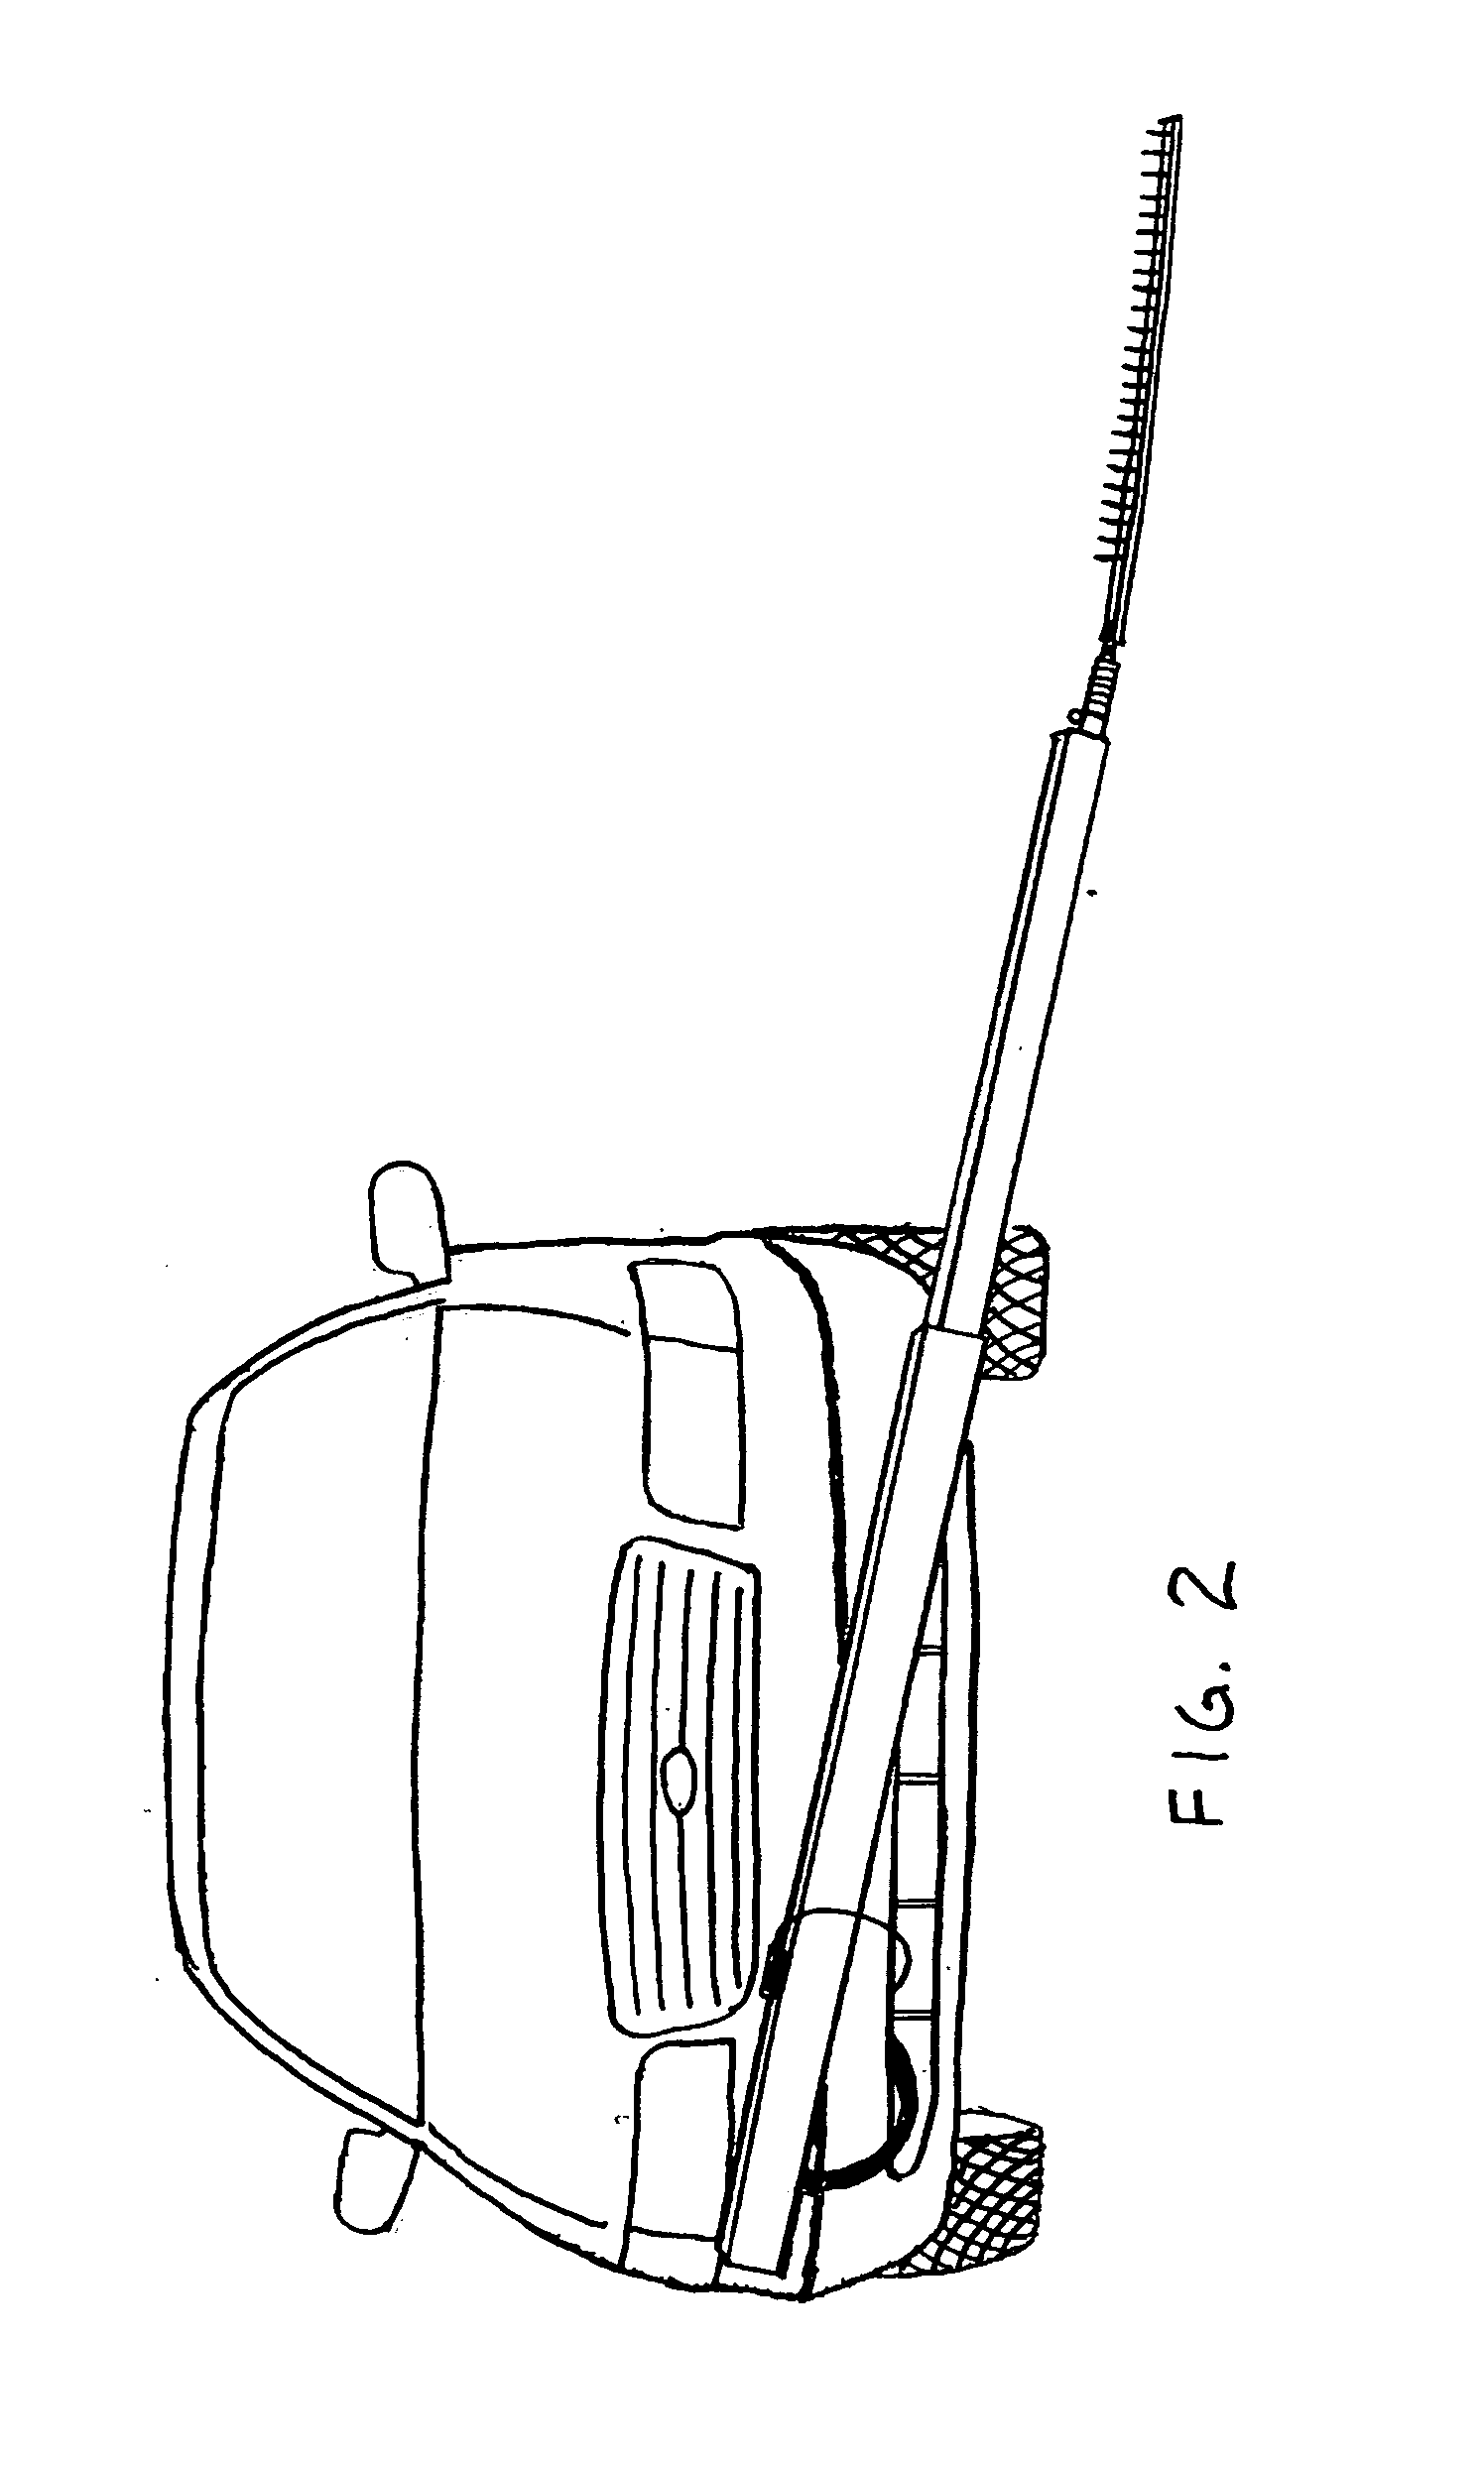 Mobile, retractile, lateral deploying, vehicle disablement device